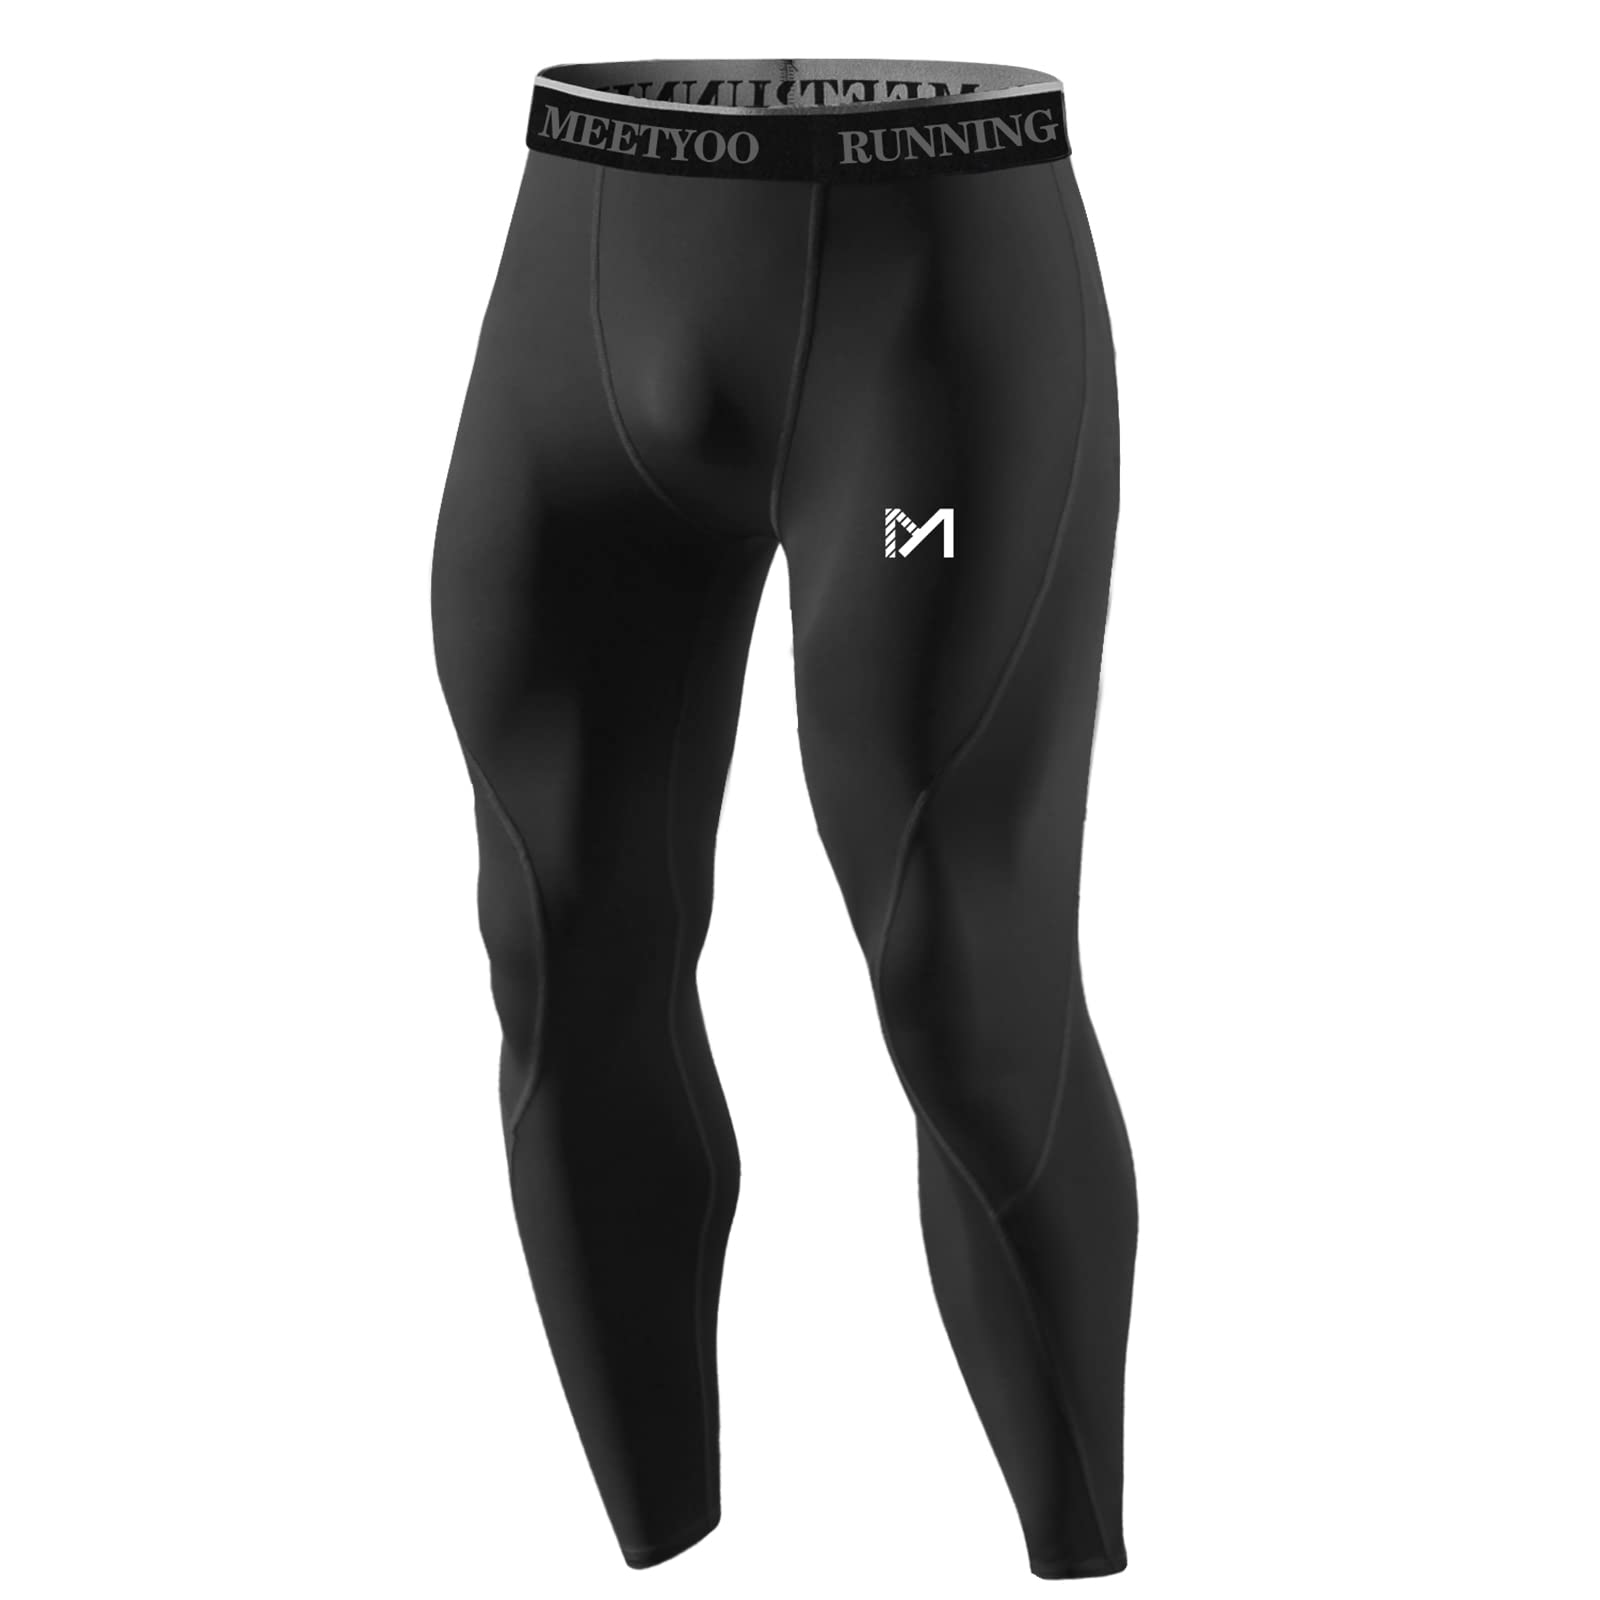  MEETYOO Men's 3/4 Compression Pants with Pockets,  Black+Grey+Blue : Clothing, Shoes & Jewelry